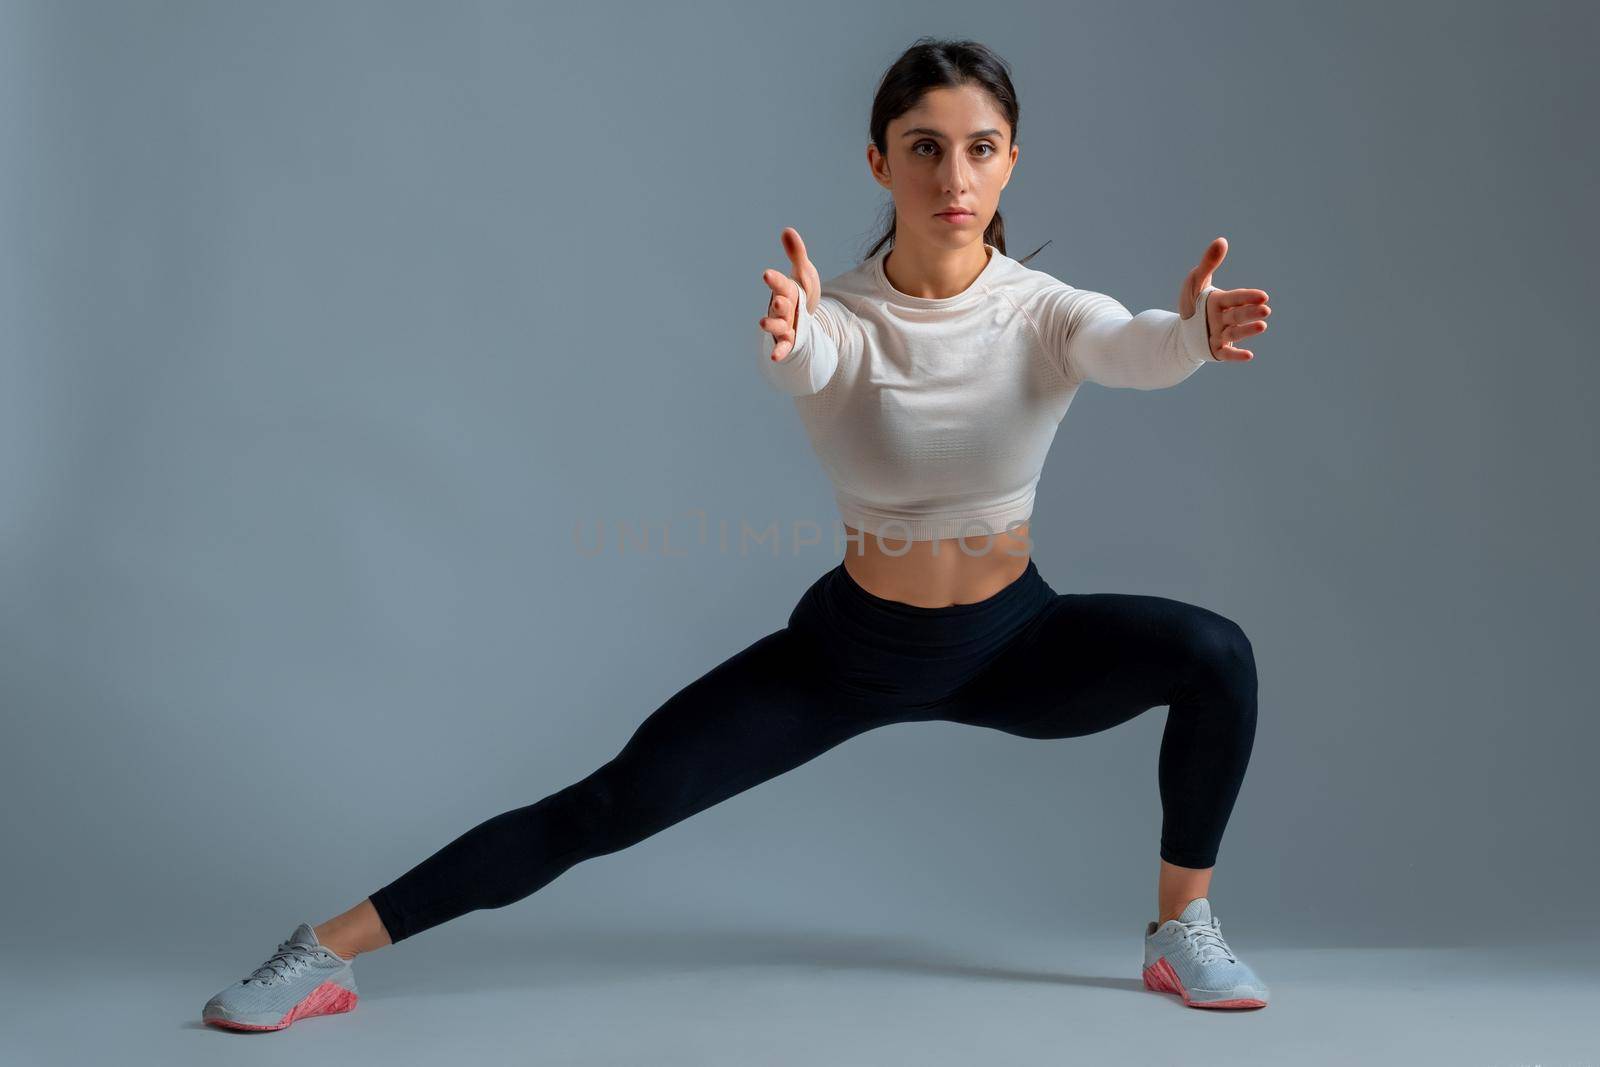 Sporty girl working out muscles of legs and glutes, doing bodyweight lateral split squats in studio on grey background. Fitness and sports motivation concept